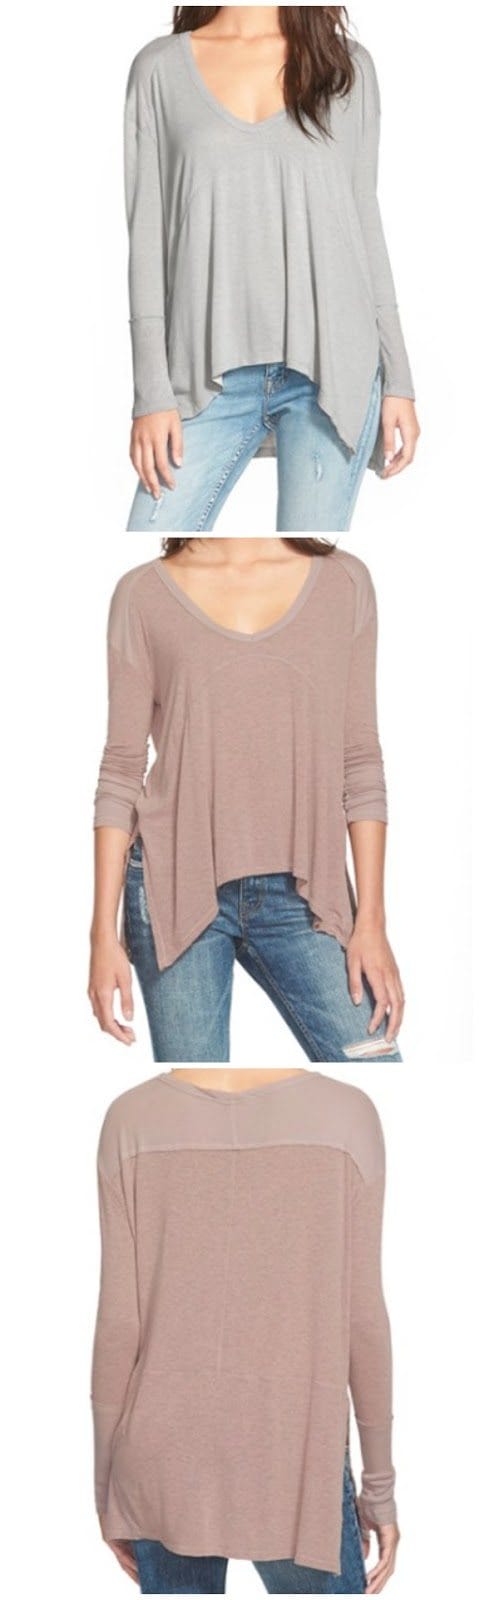 Fall/Winter fashion - Elodie Ribbed Long Sleeve Tee